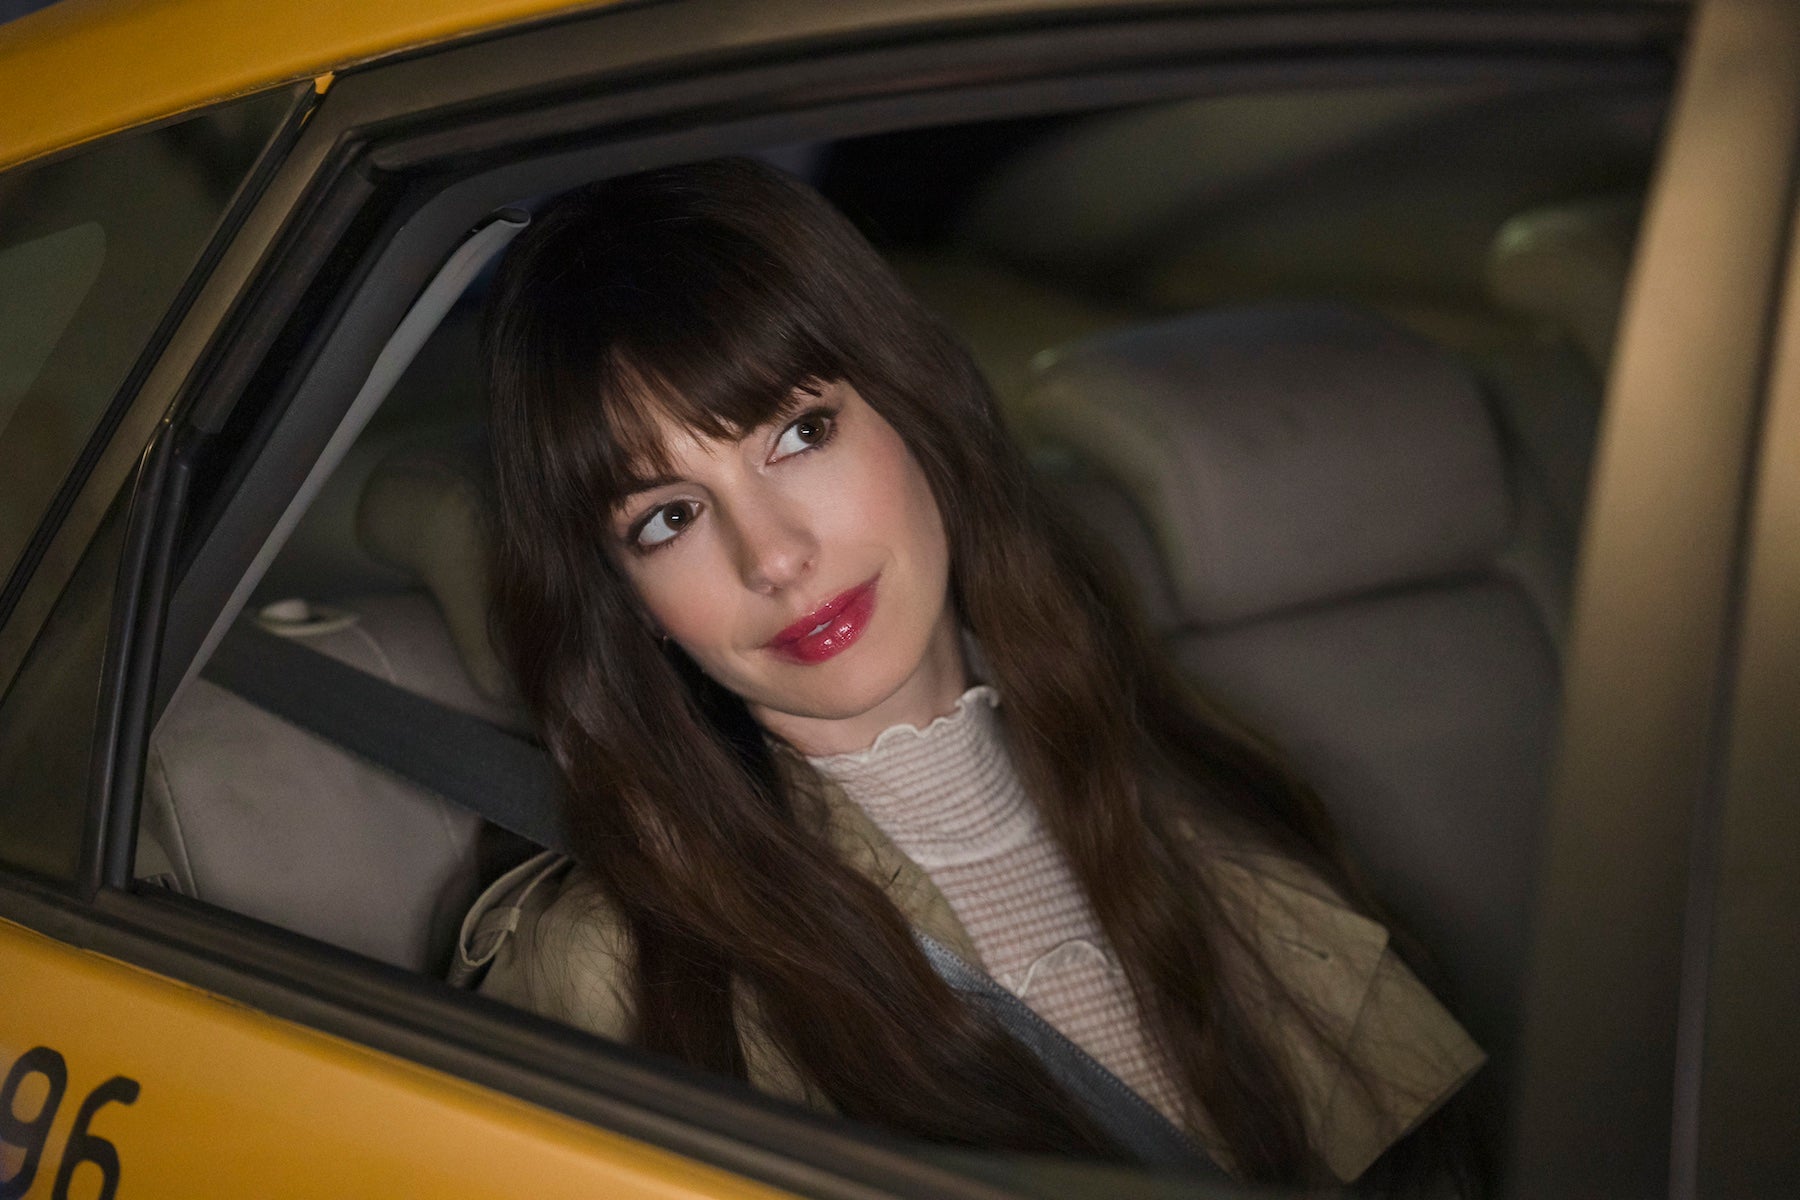 Still from 'The Idea of You' featuring Anne Hathaway looking out of the window of a yellow taxi cab